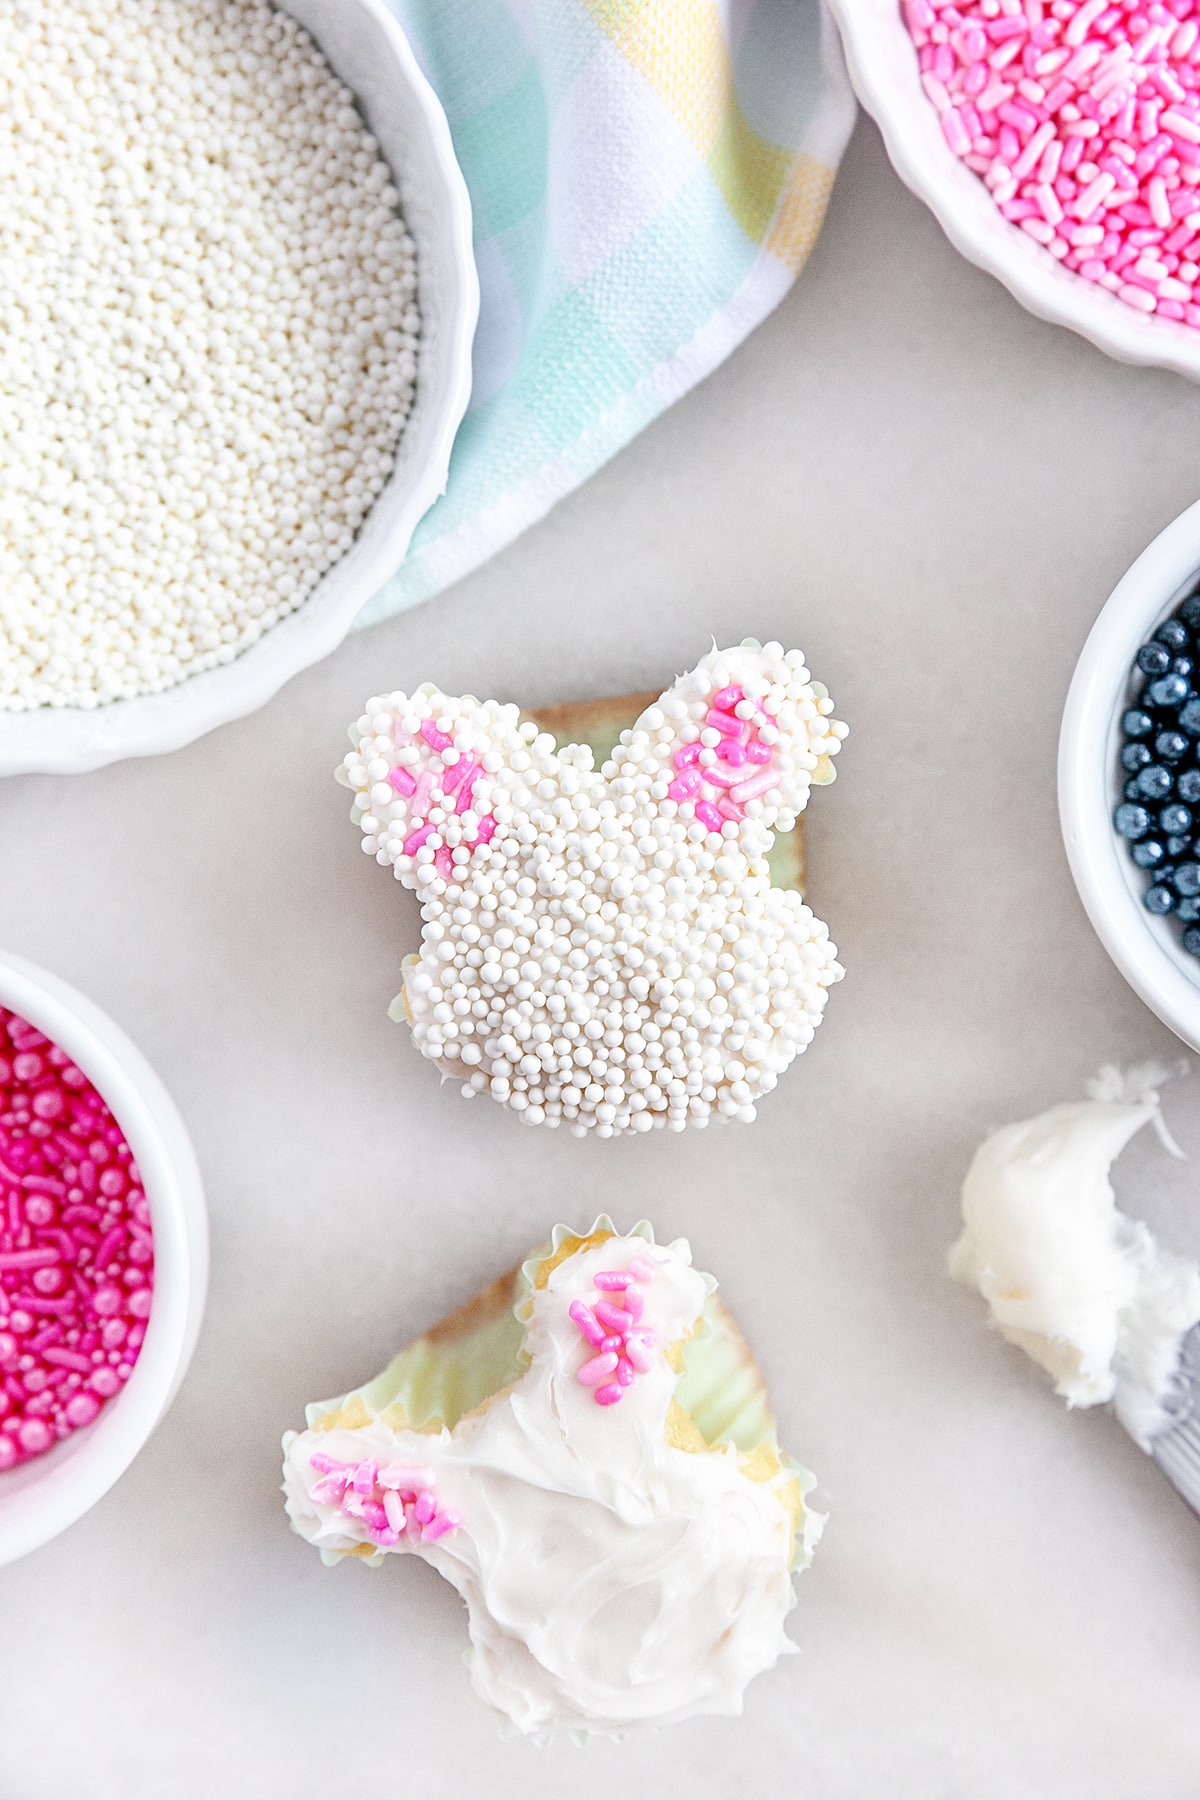 Adding icing and sprinkles to the cupcakes. 